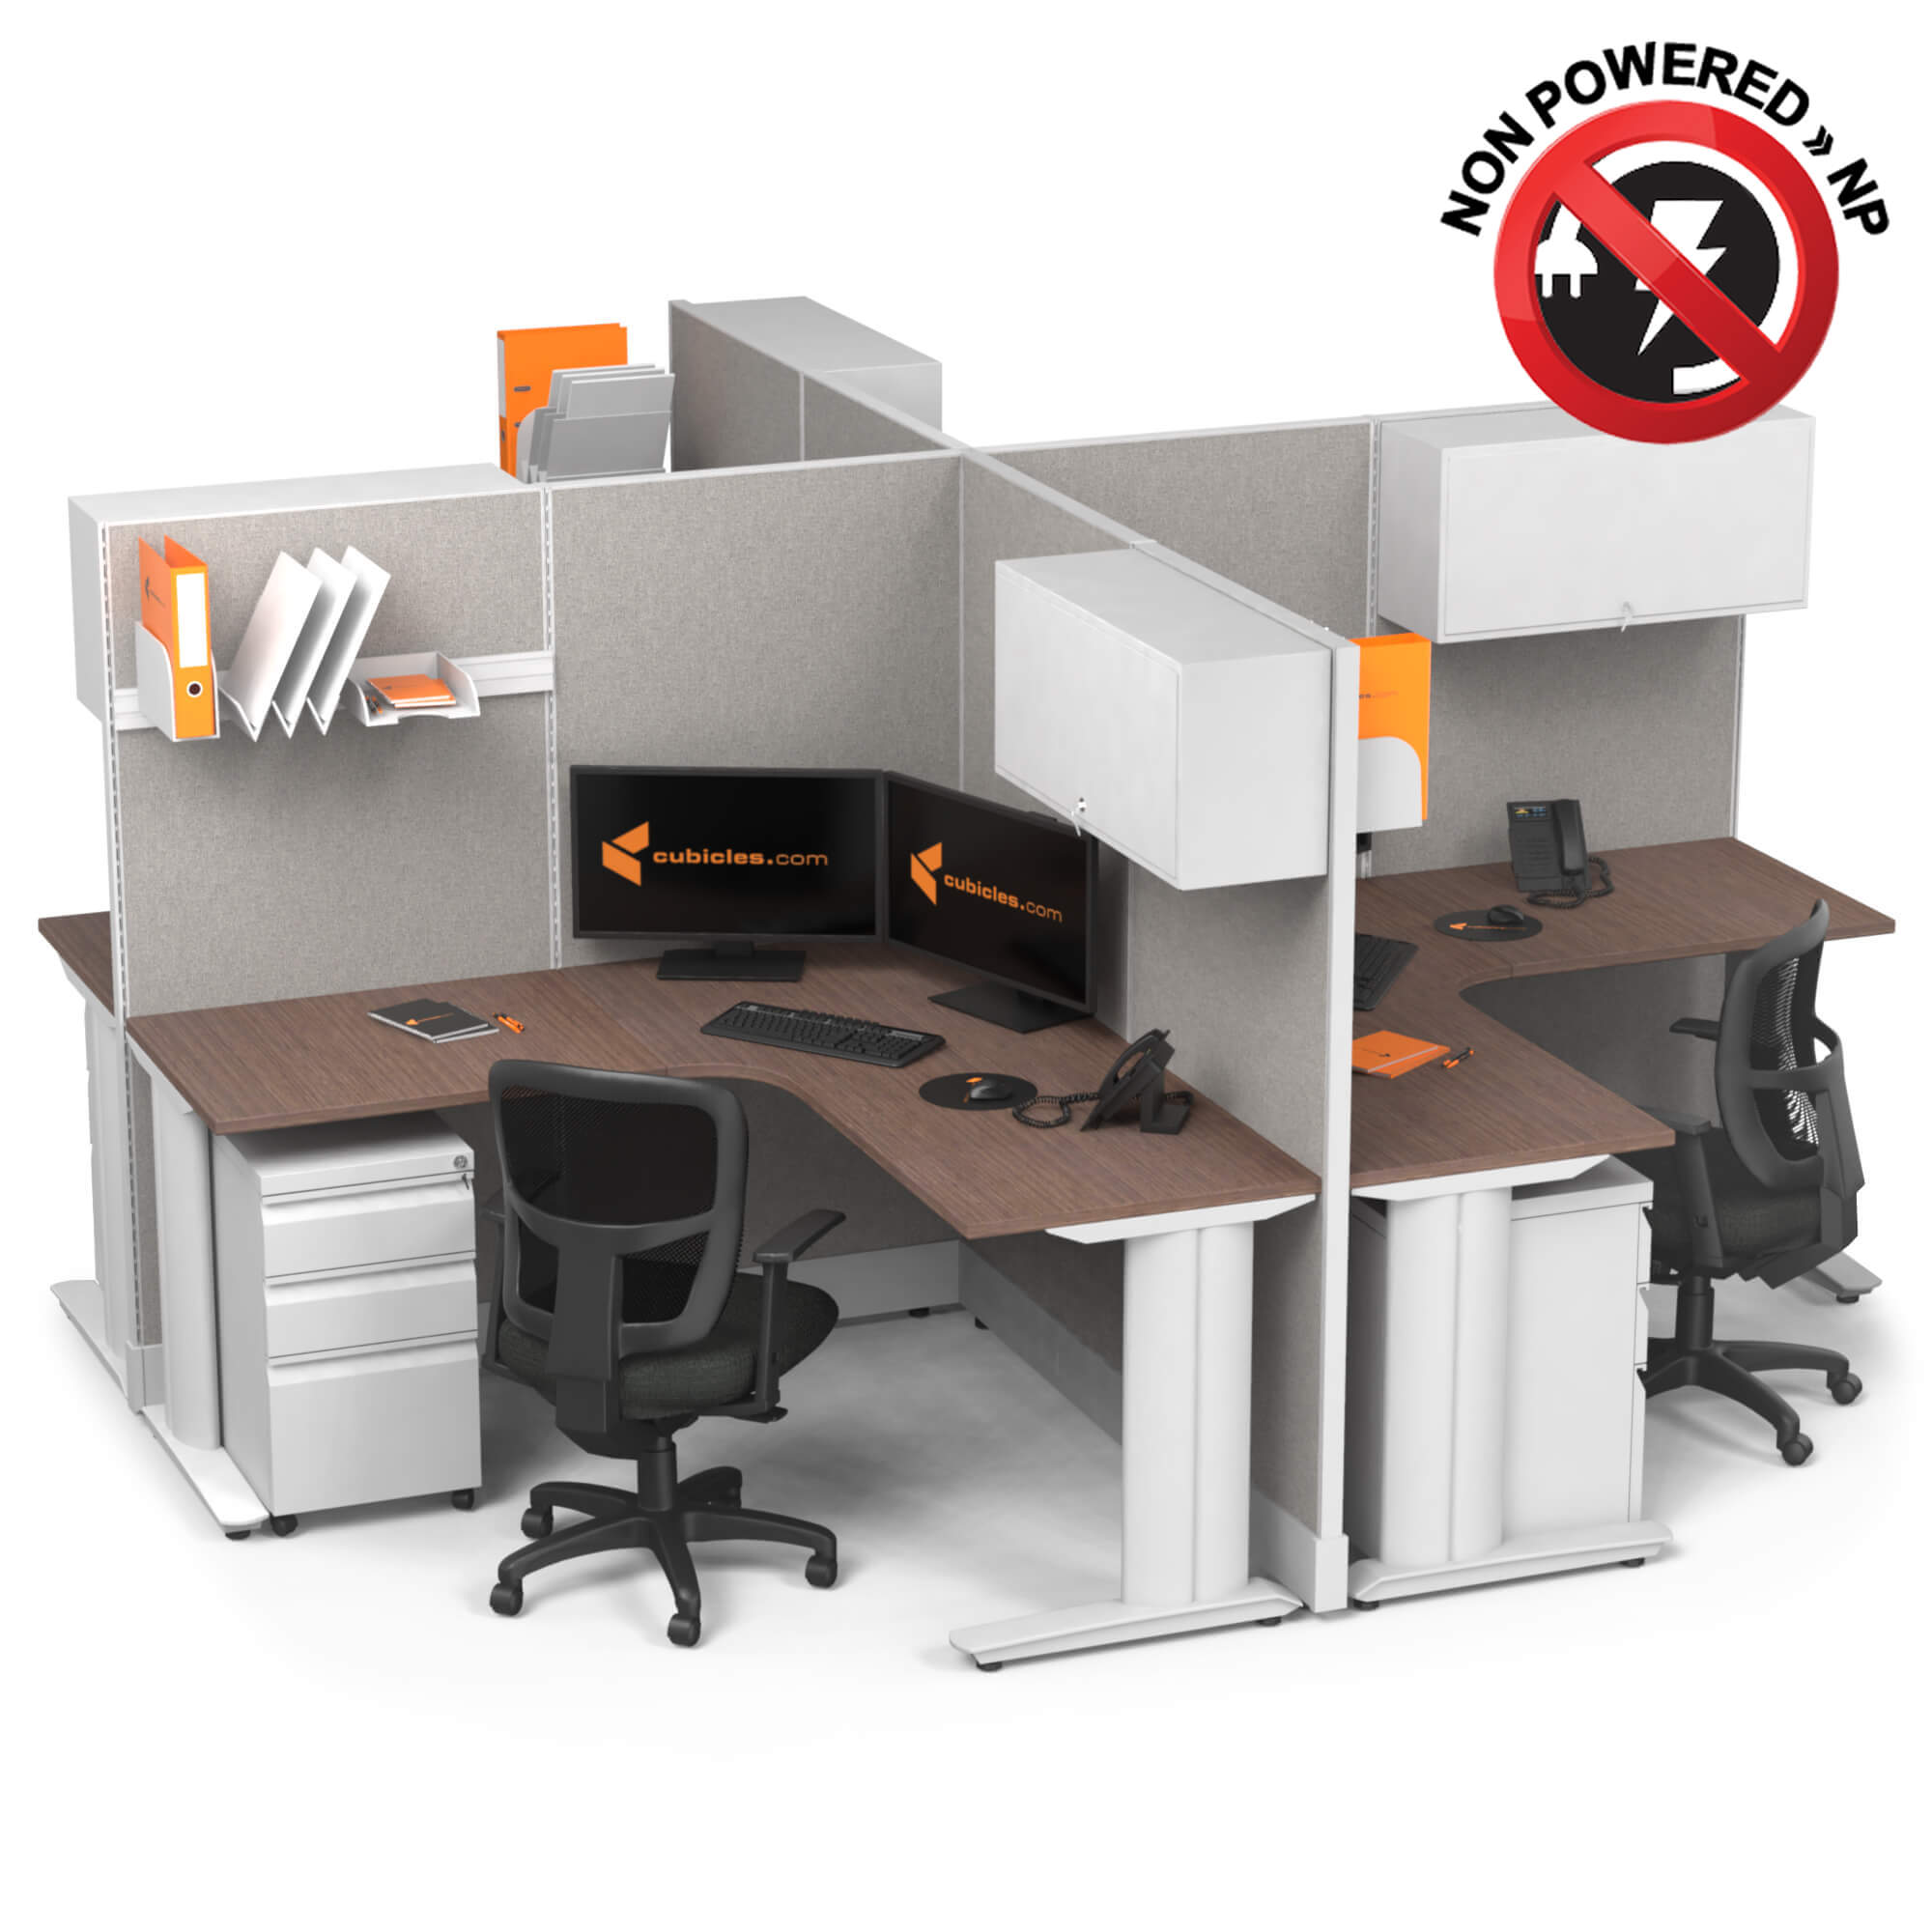 cubicle-desk-l-shaped-with-storage-4pack-x-cluster-np.jpg